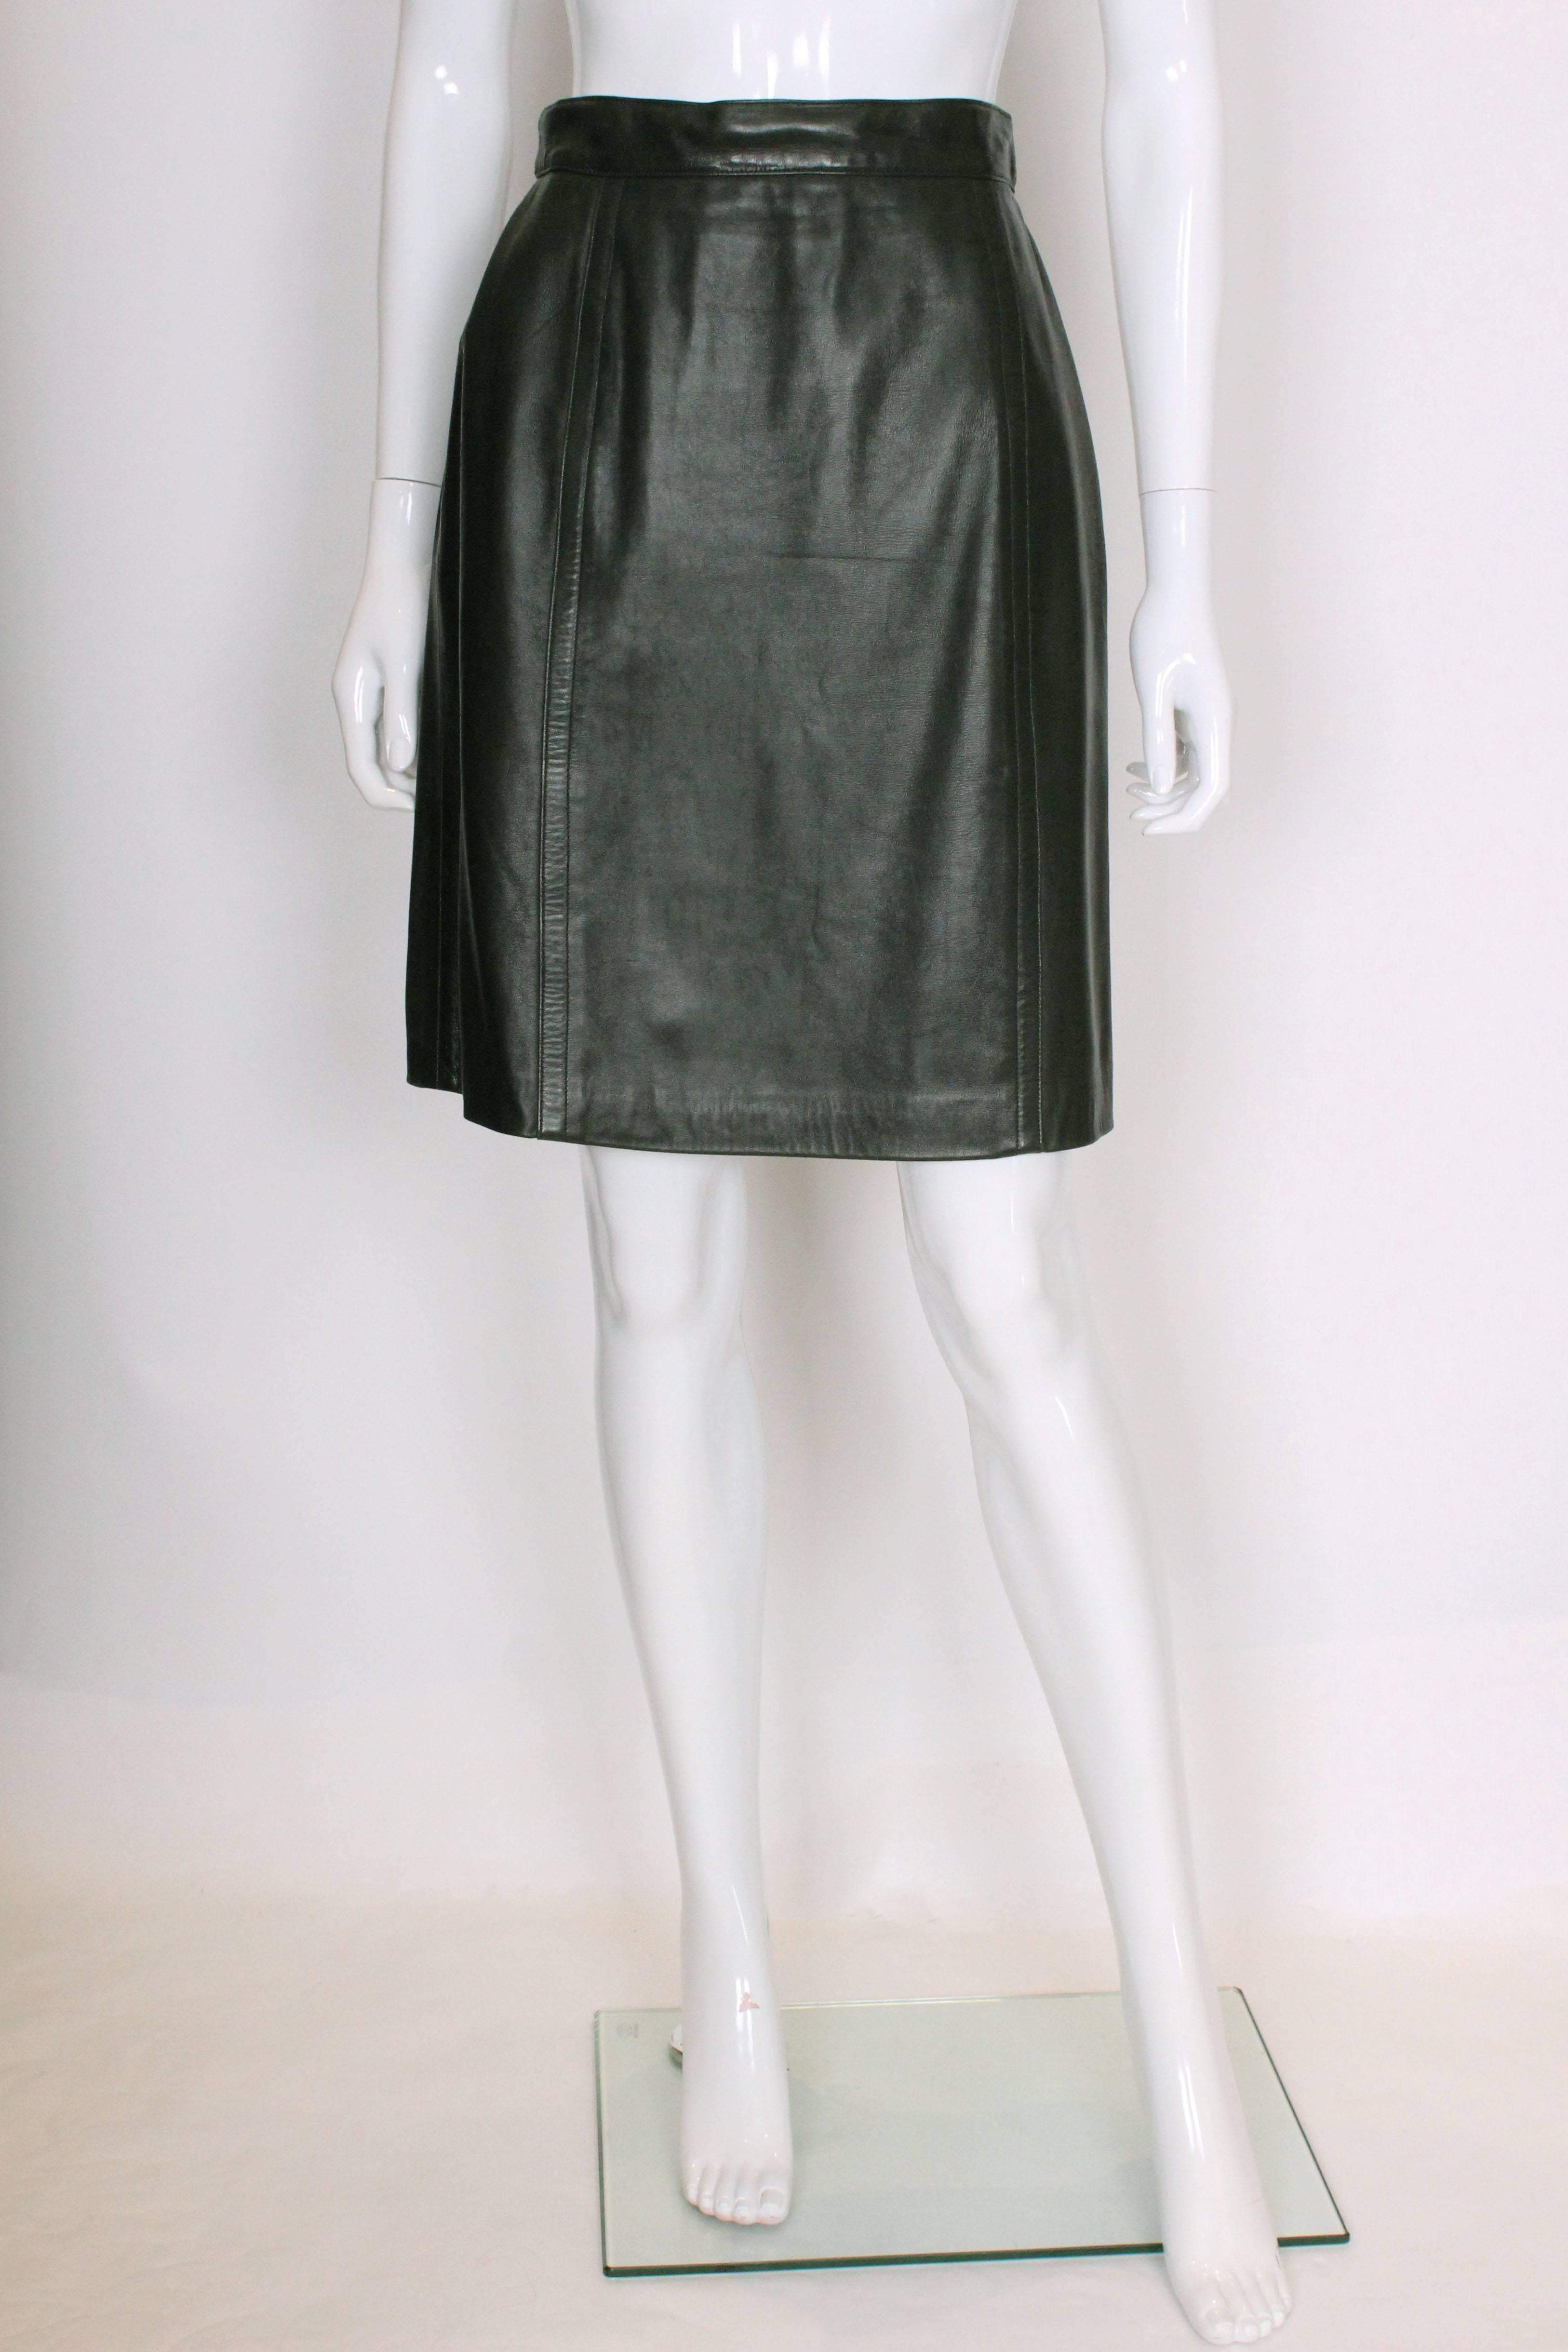 A chic leather skirt by Celine. In a Christmas tree green super soft leather, this skirt is fully lined and has a central back zip